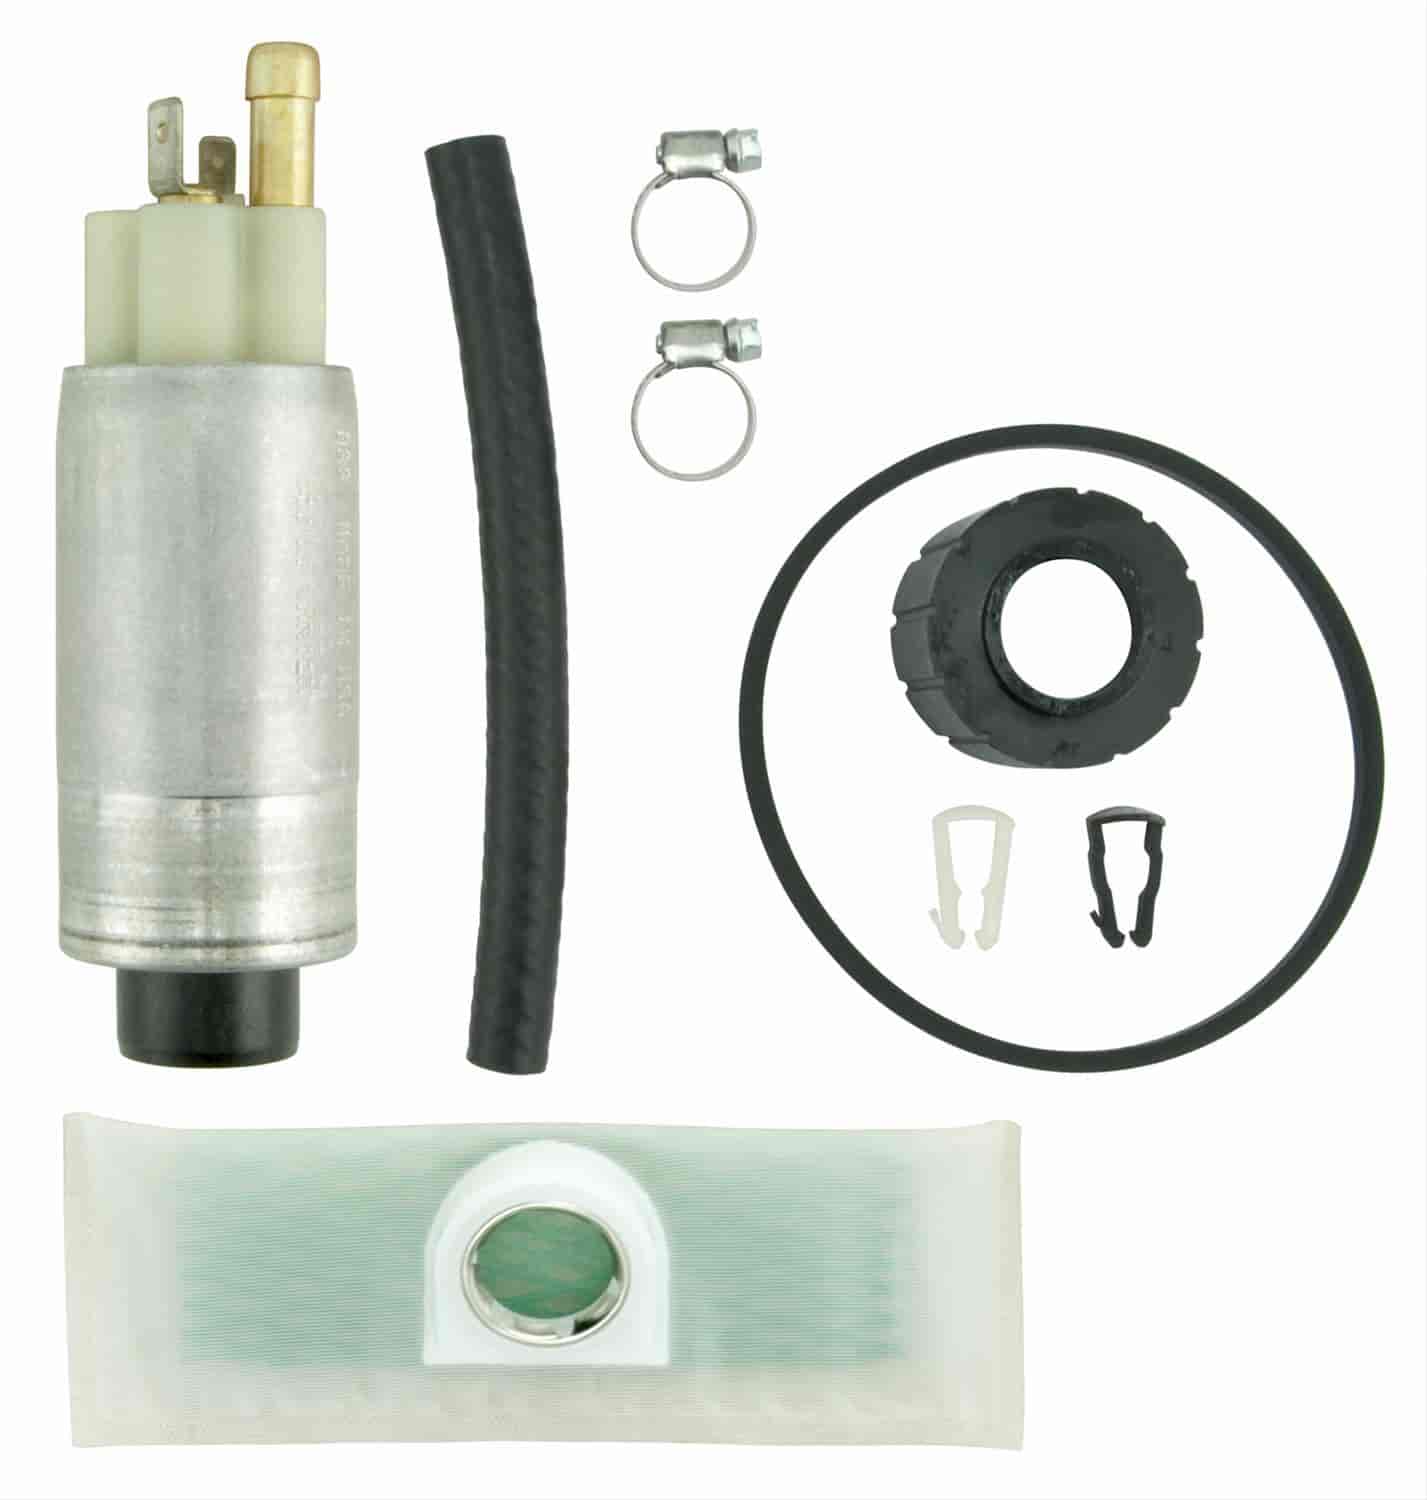 EFI In-Tank Electric Fuel Pump And Strainer Set for 1991-1994 Ford Tempo/Mercury Topaz